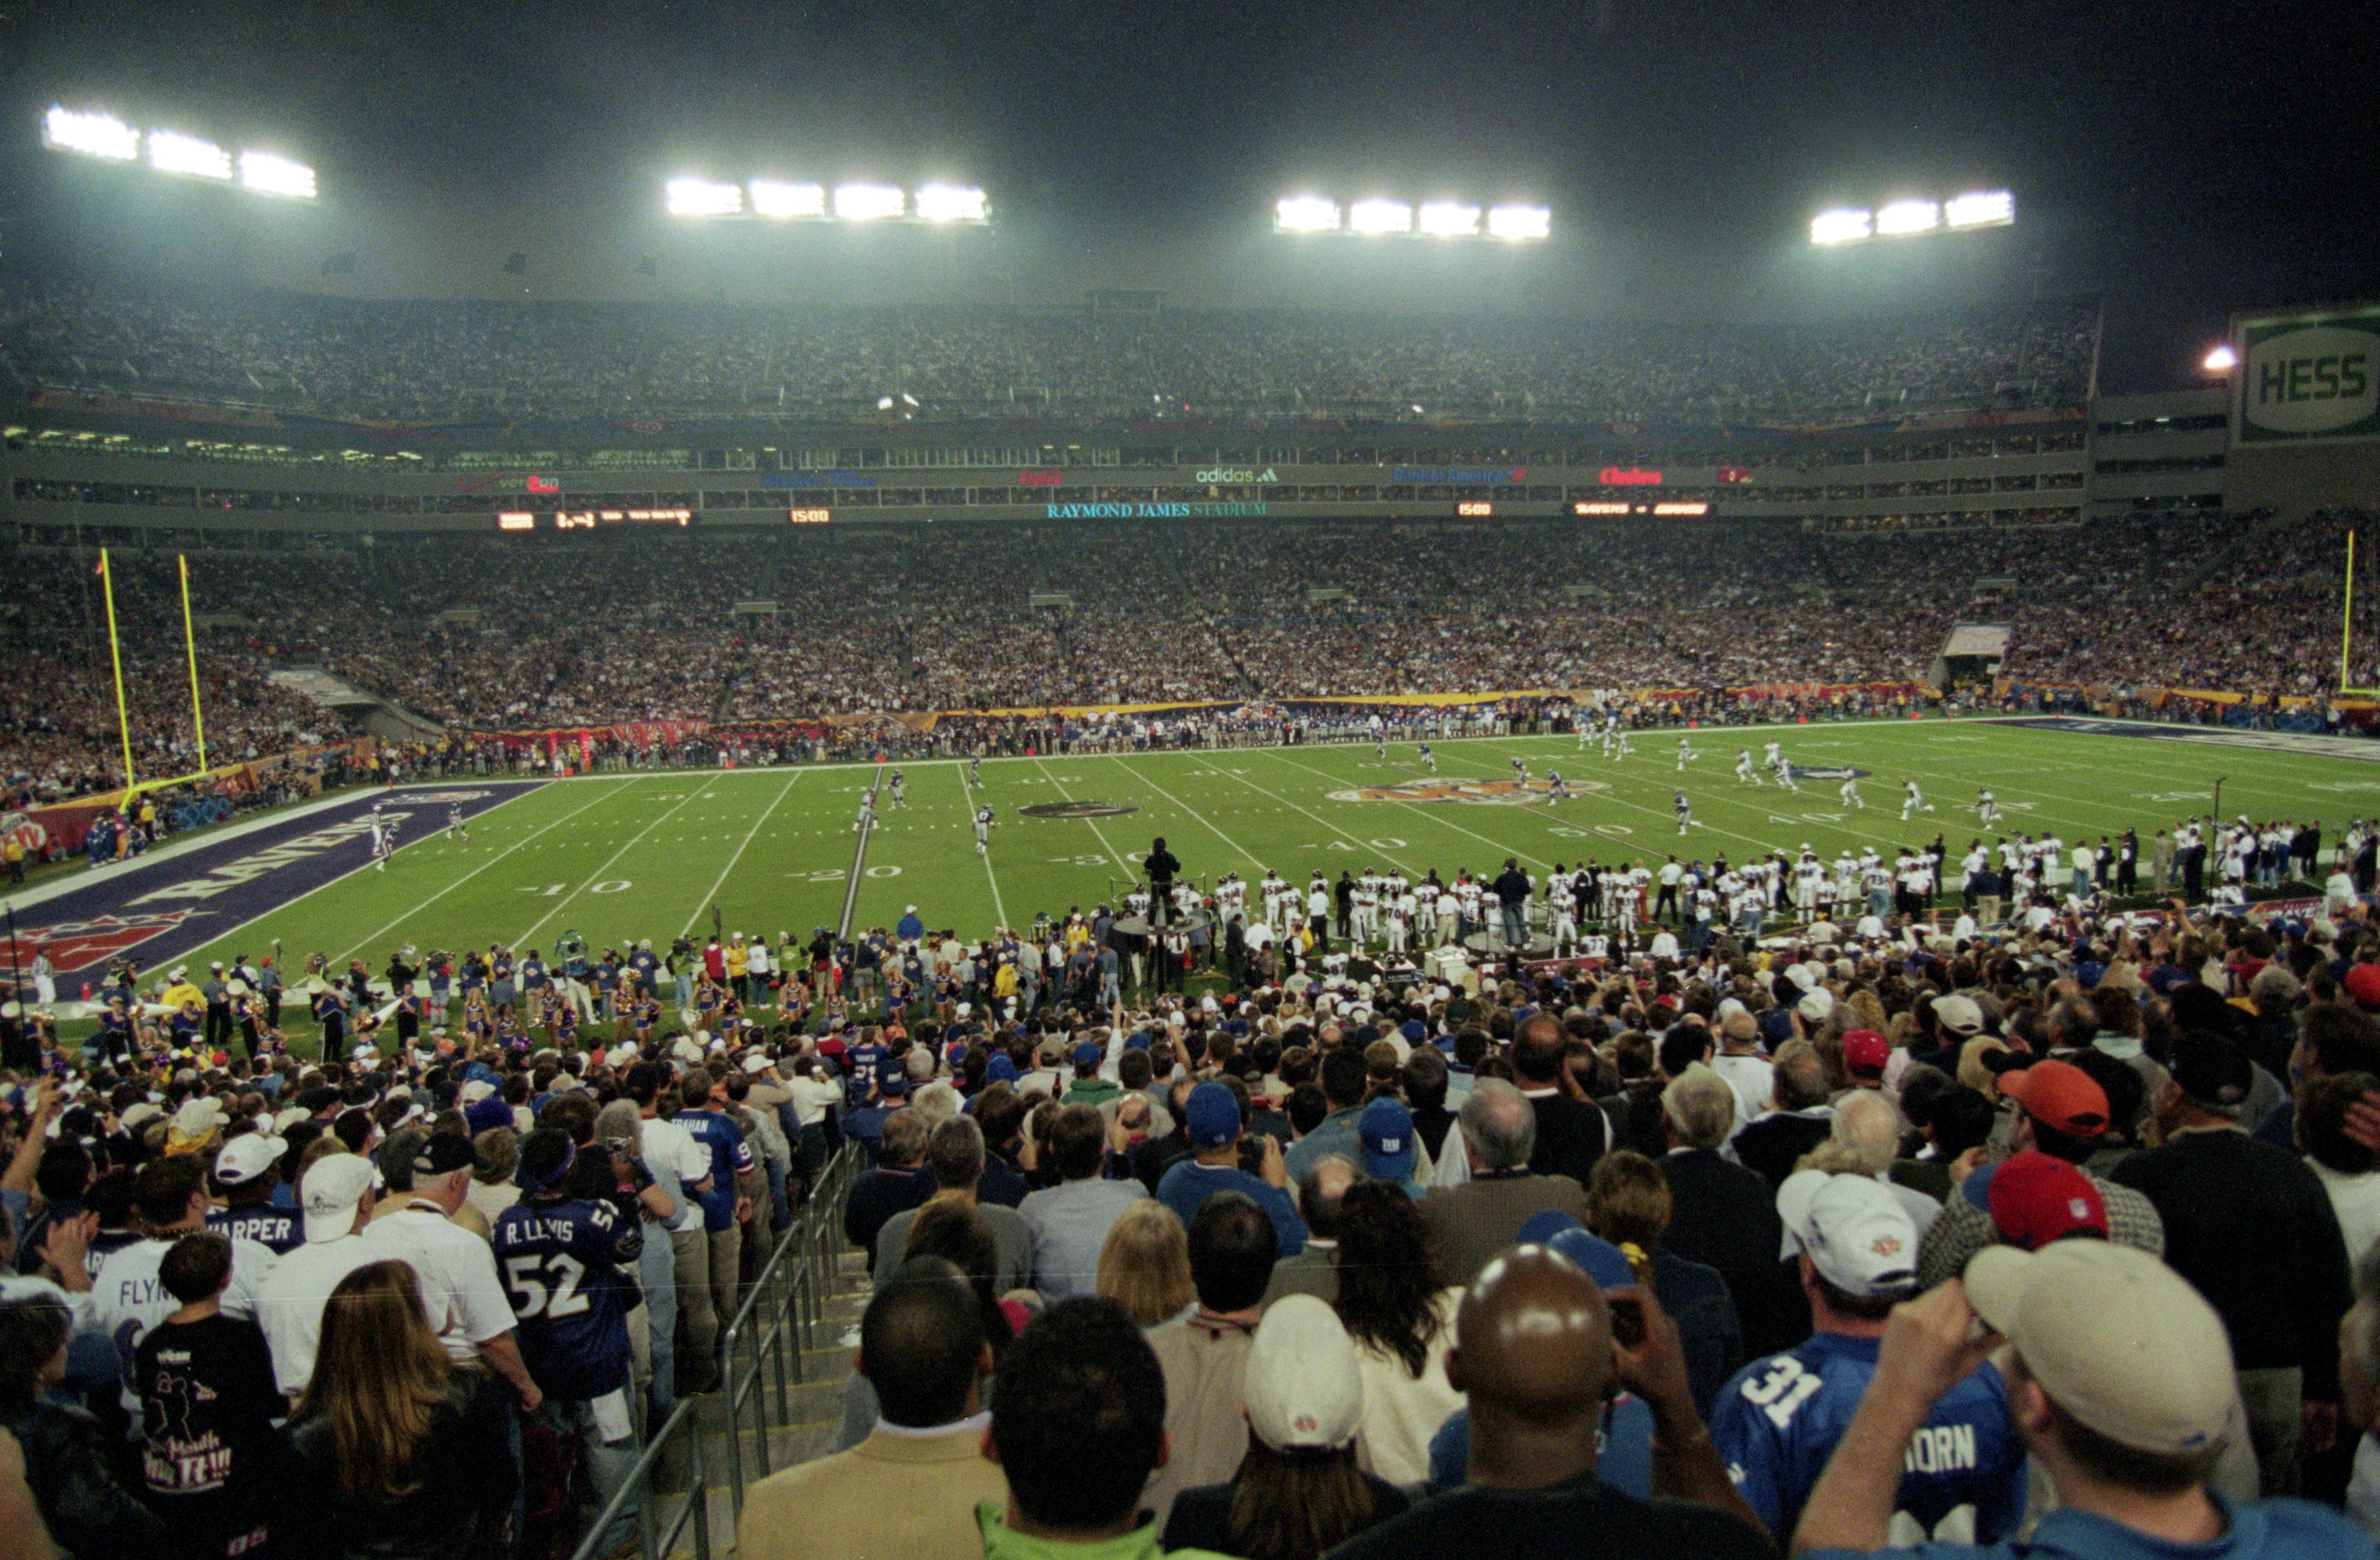  A view of the kick off during the Super Bowl XXXV Game between the New York Giants and the Baltimore Ravens at the Raymond James Stadium in Tampa, Florida.